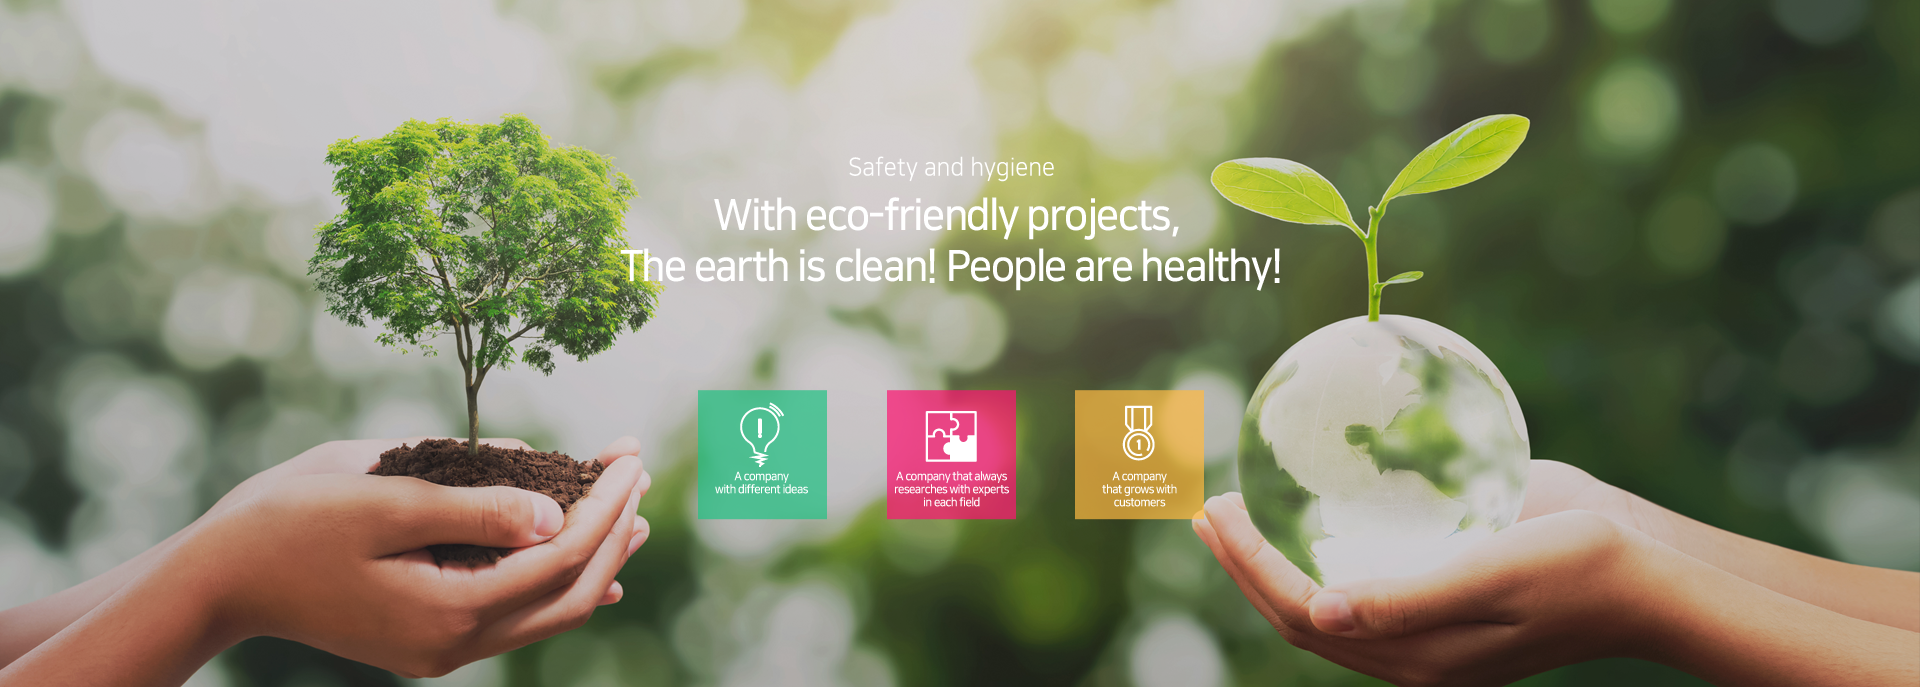 Safety and Hygiene - With eco-friendly projects, The earth is clean! People are healthy!